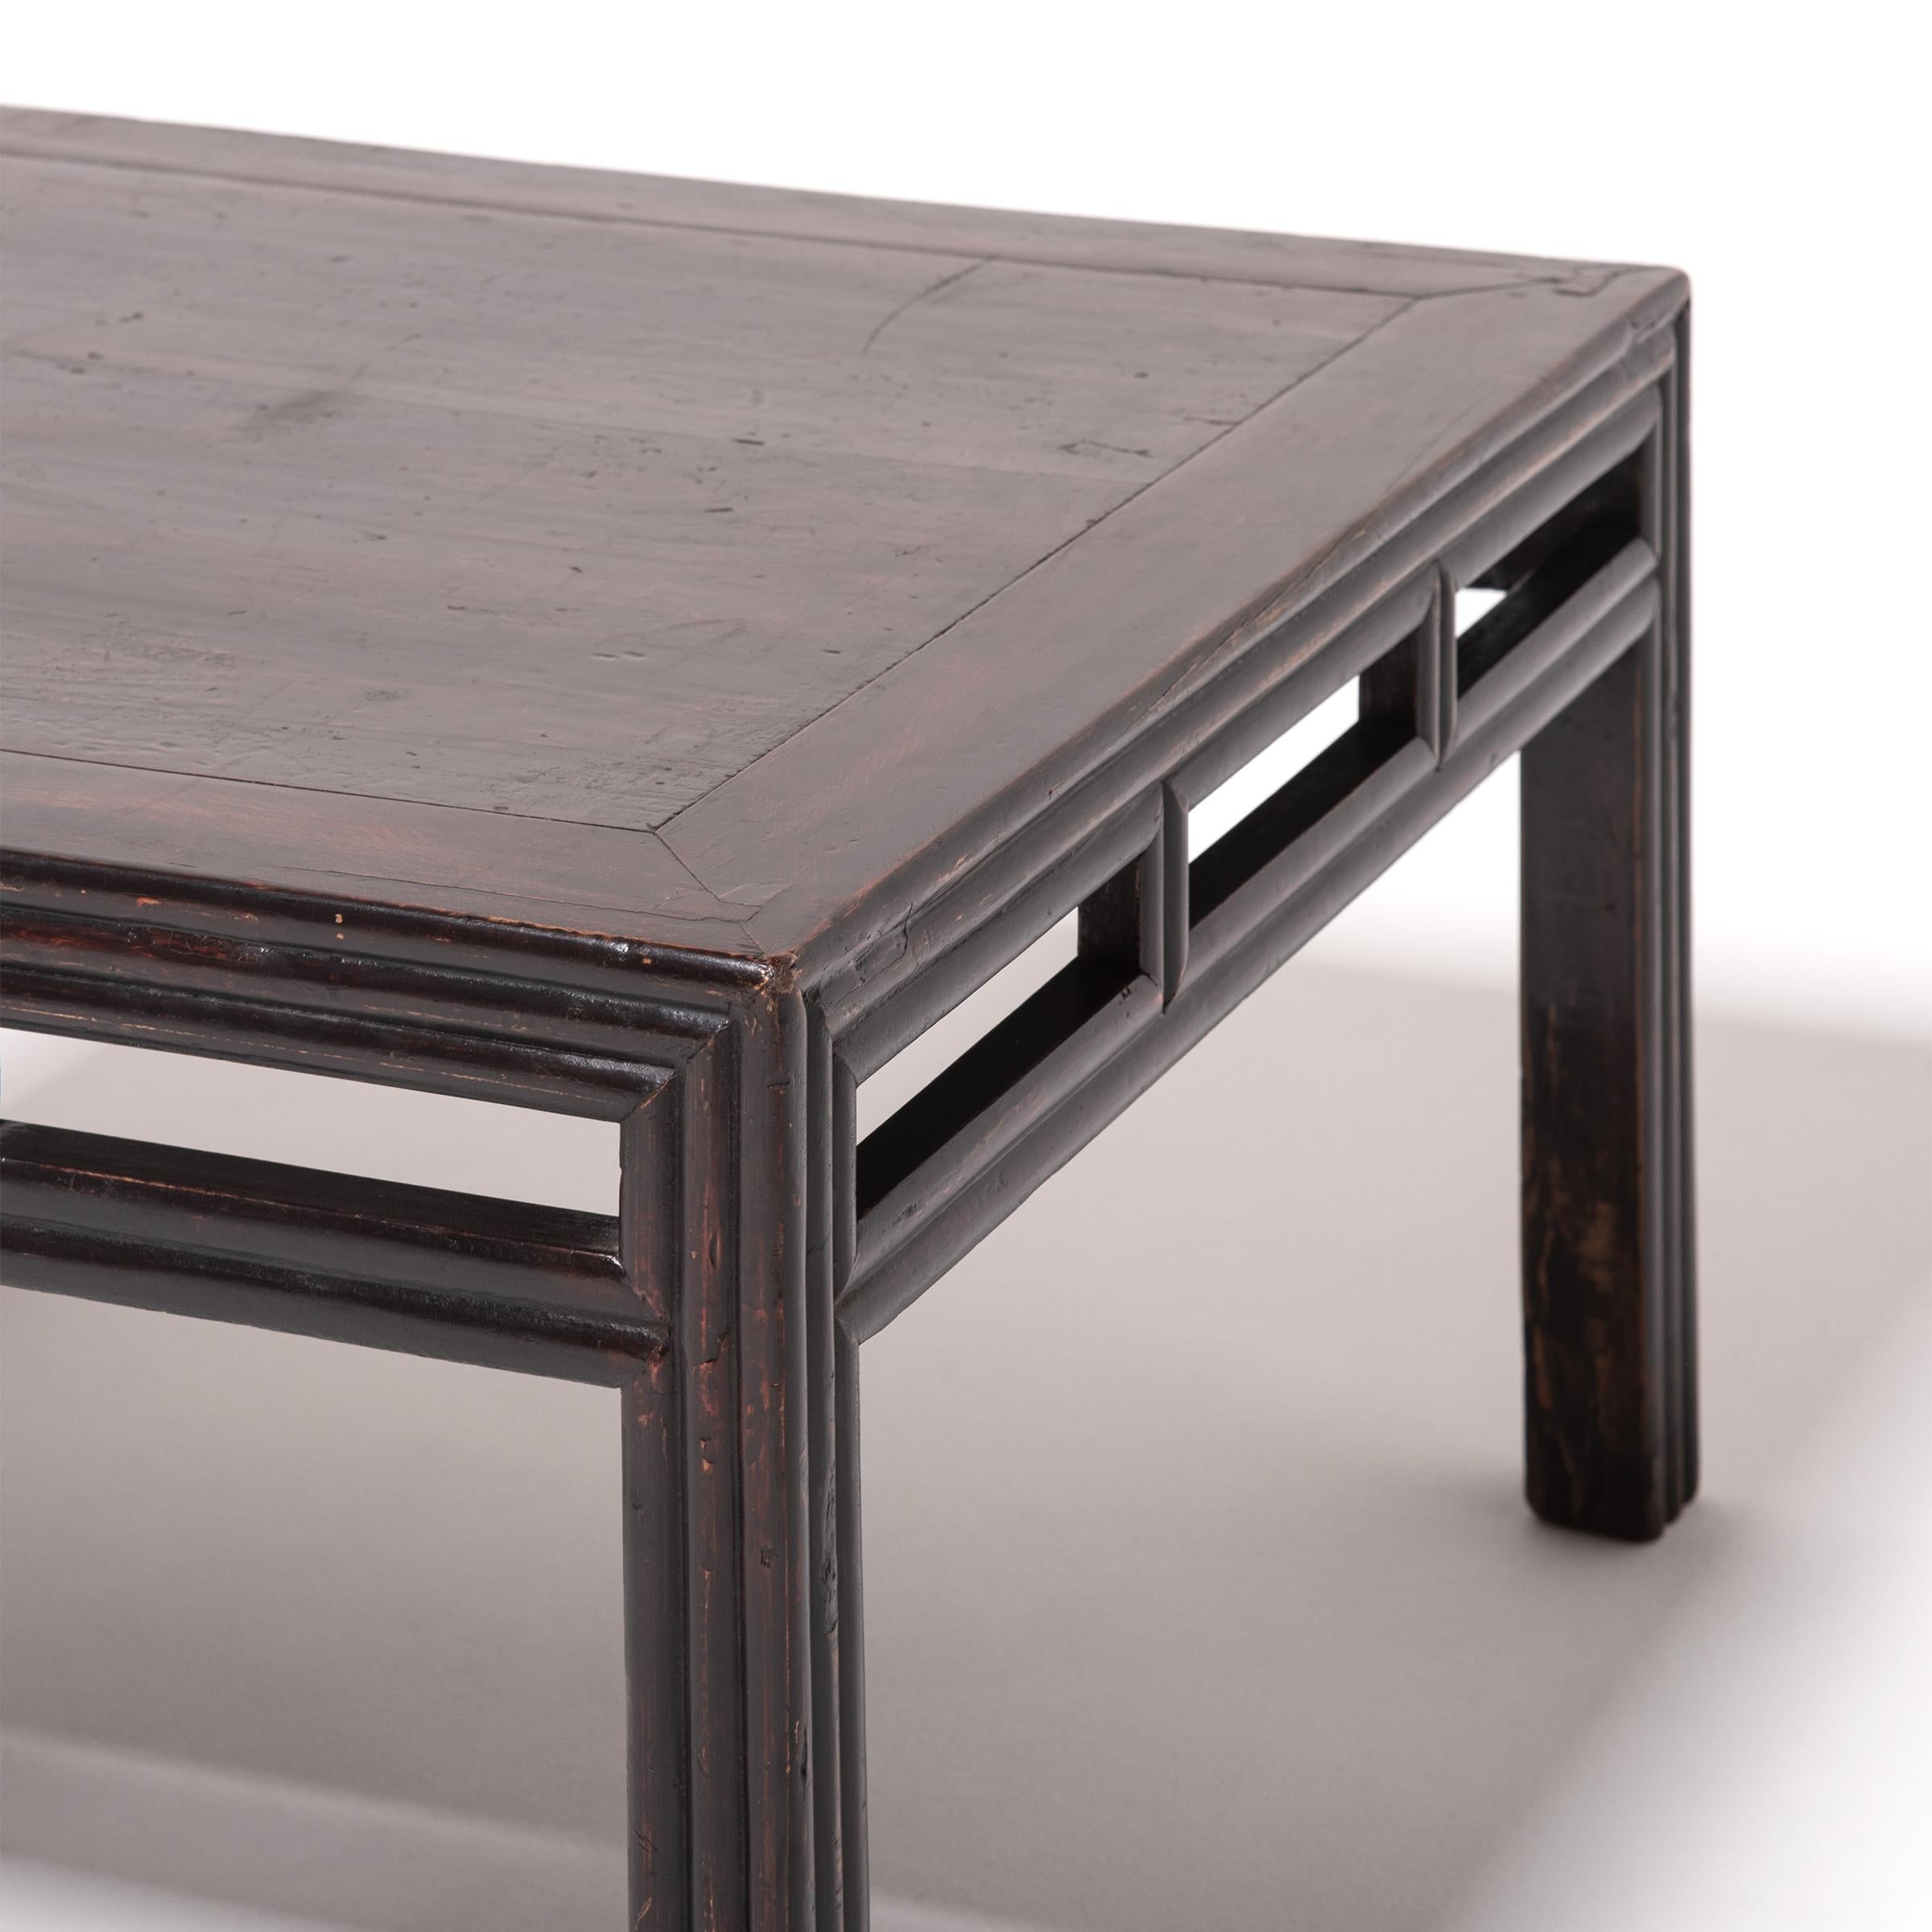 20th Century Low Chinese Square Table with Ridged Sides, c. 1900 For Sale